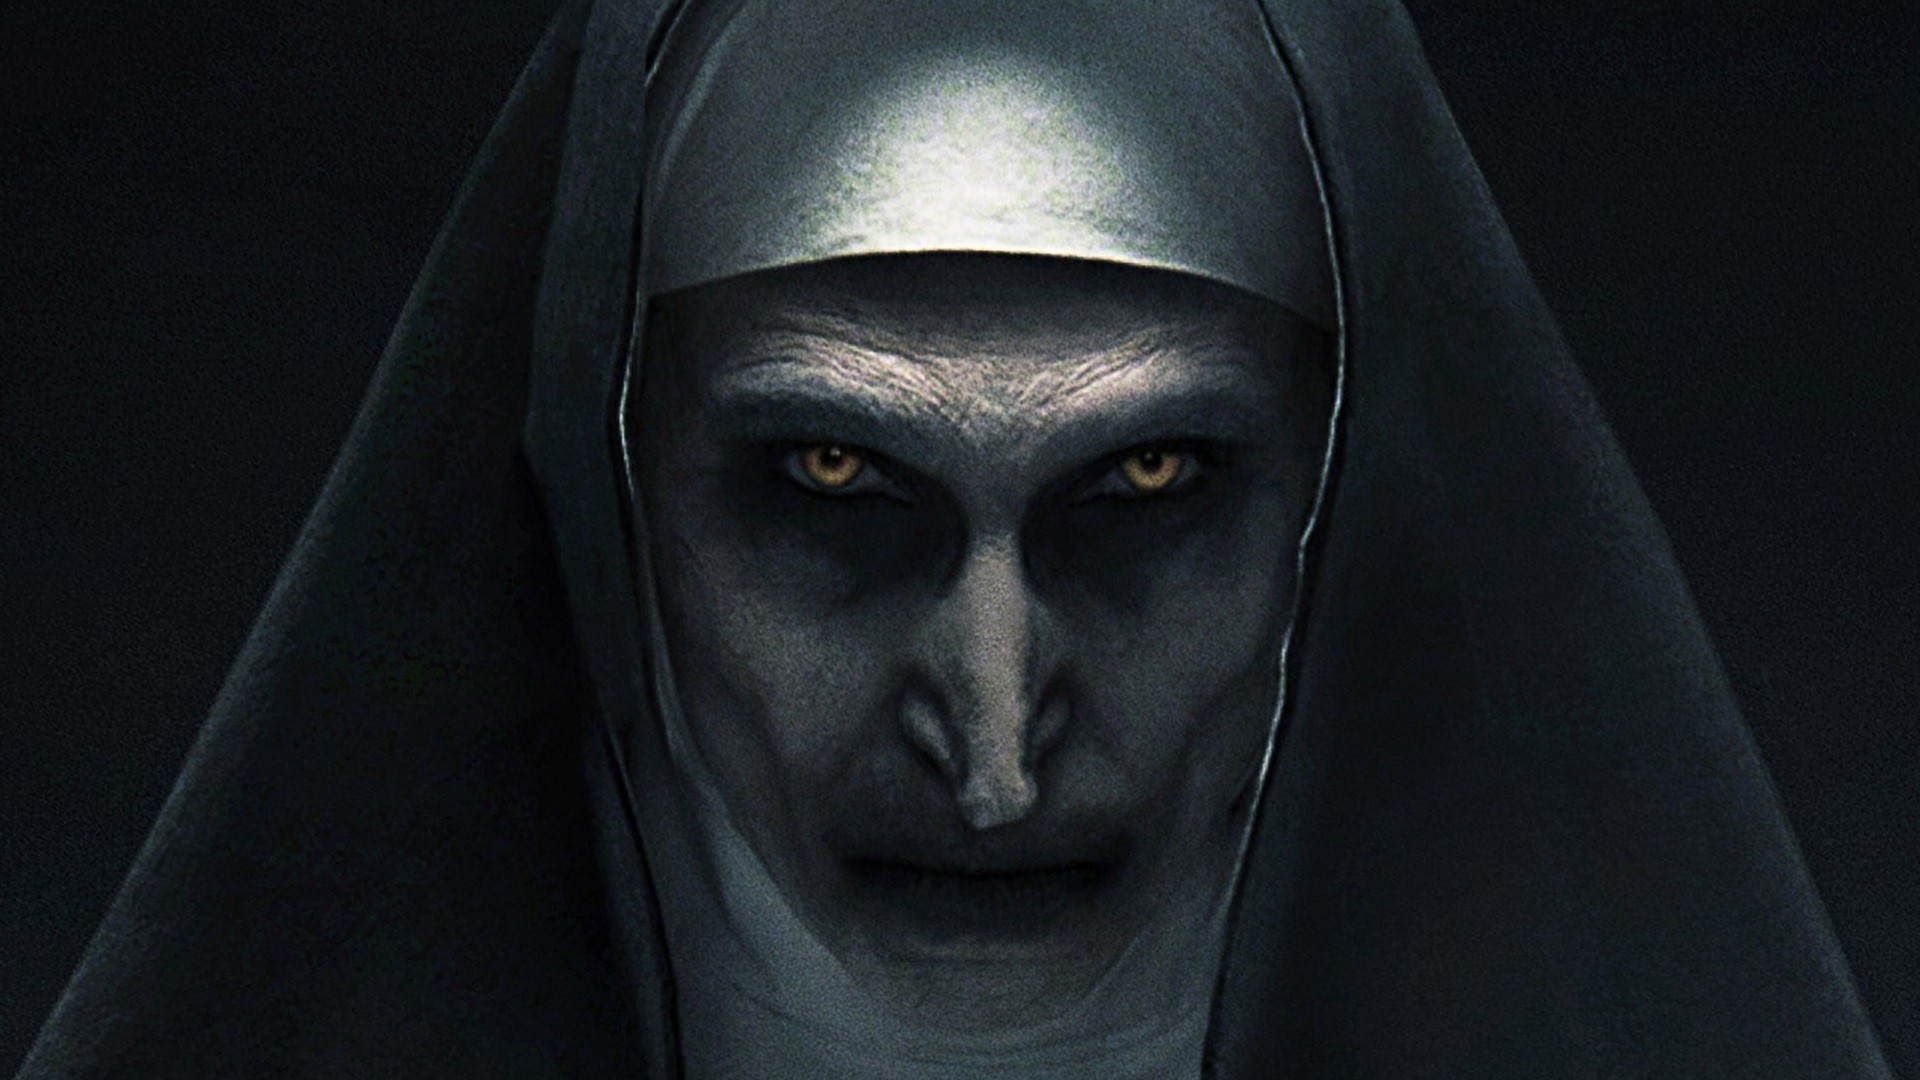 The Nun Movie Desktop Wallpaper with image resolution 1920x1080 pixel. You can use this wallpaper as background for your desktop Computer Screensavers, Android or iPhone smartphones